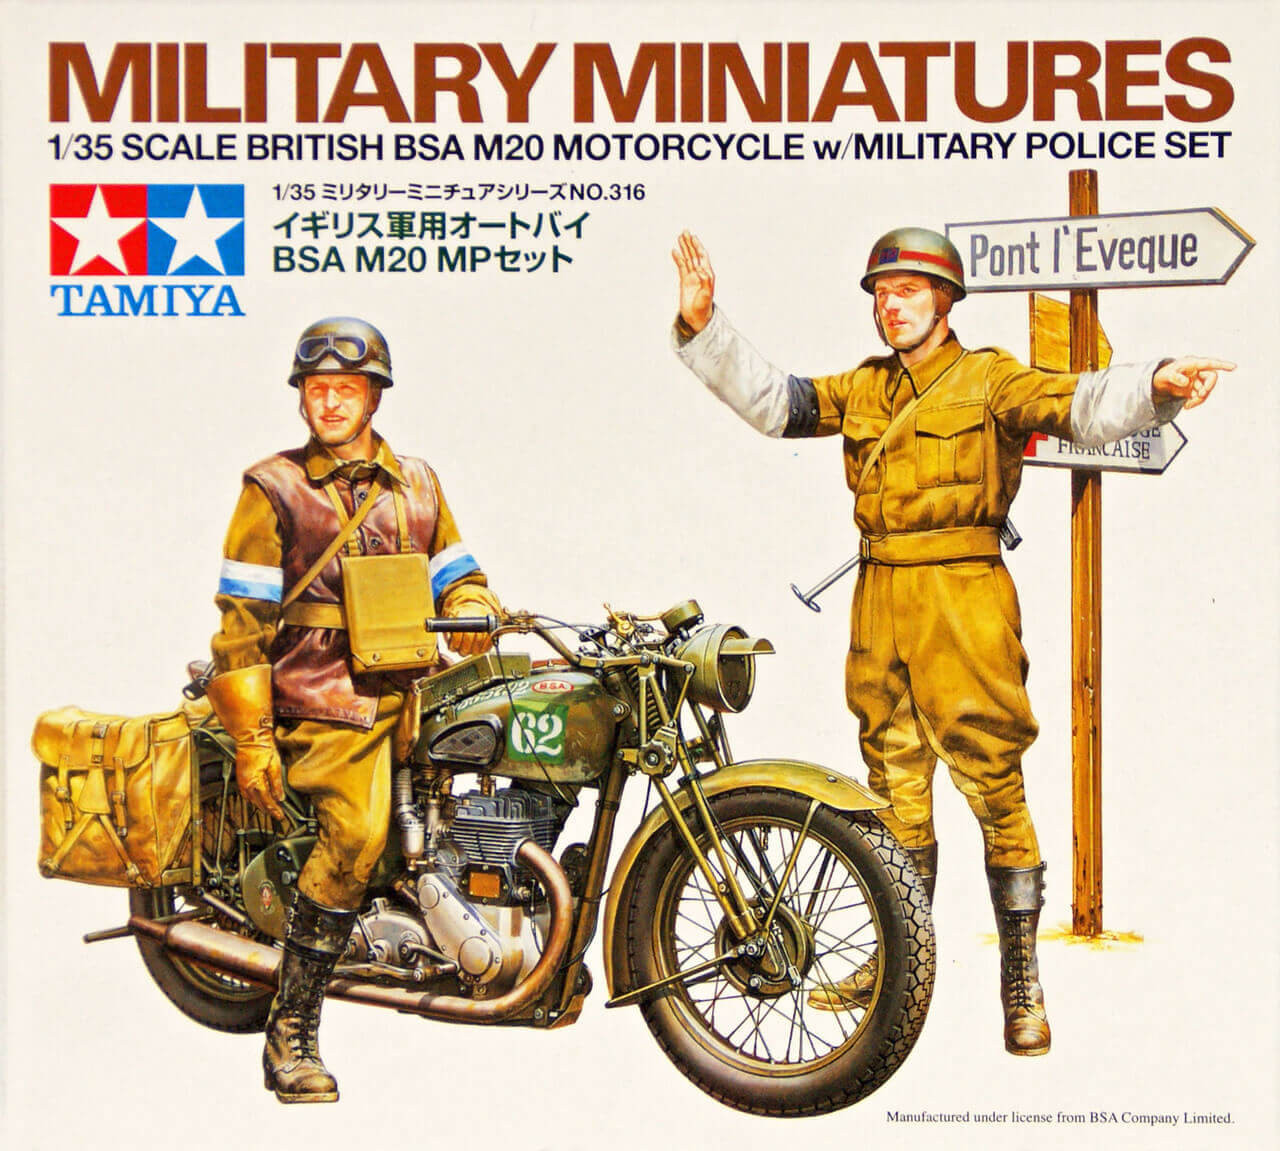 plastic military model kit of British military police and motorcycle